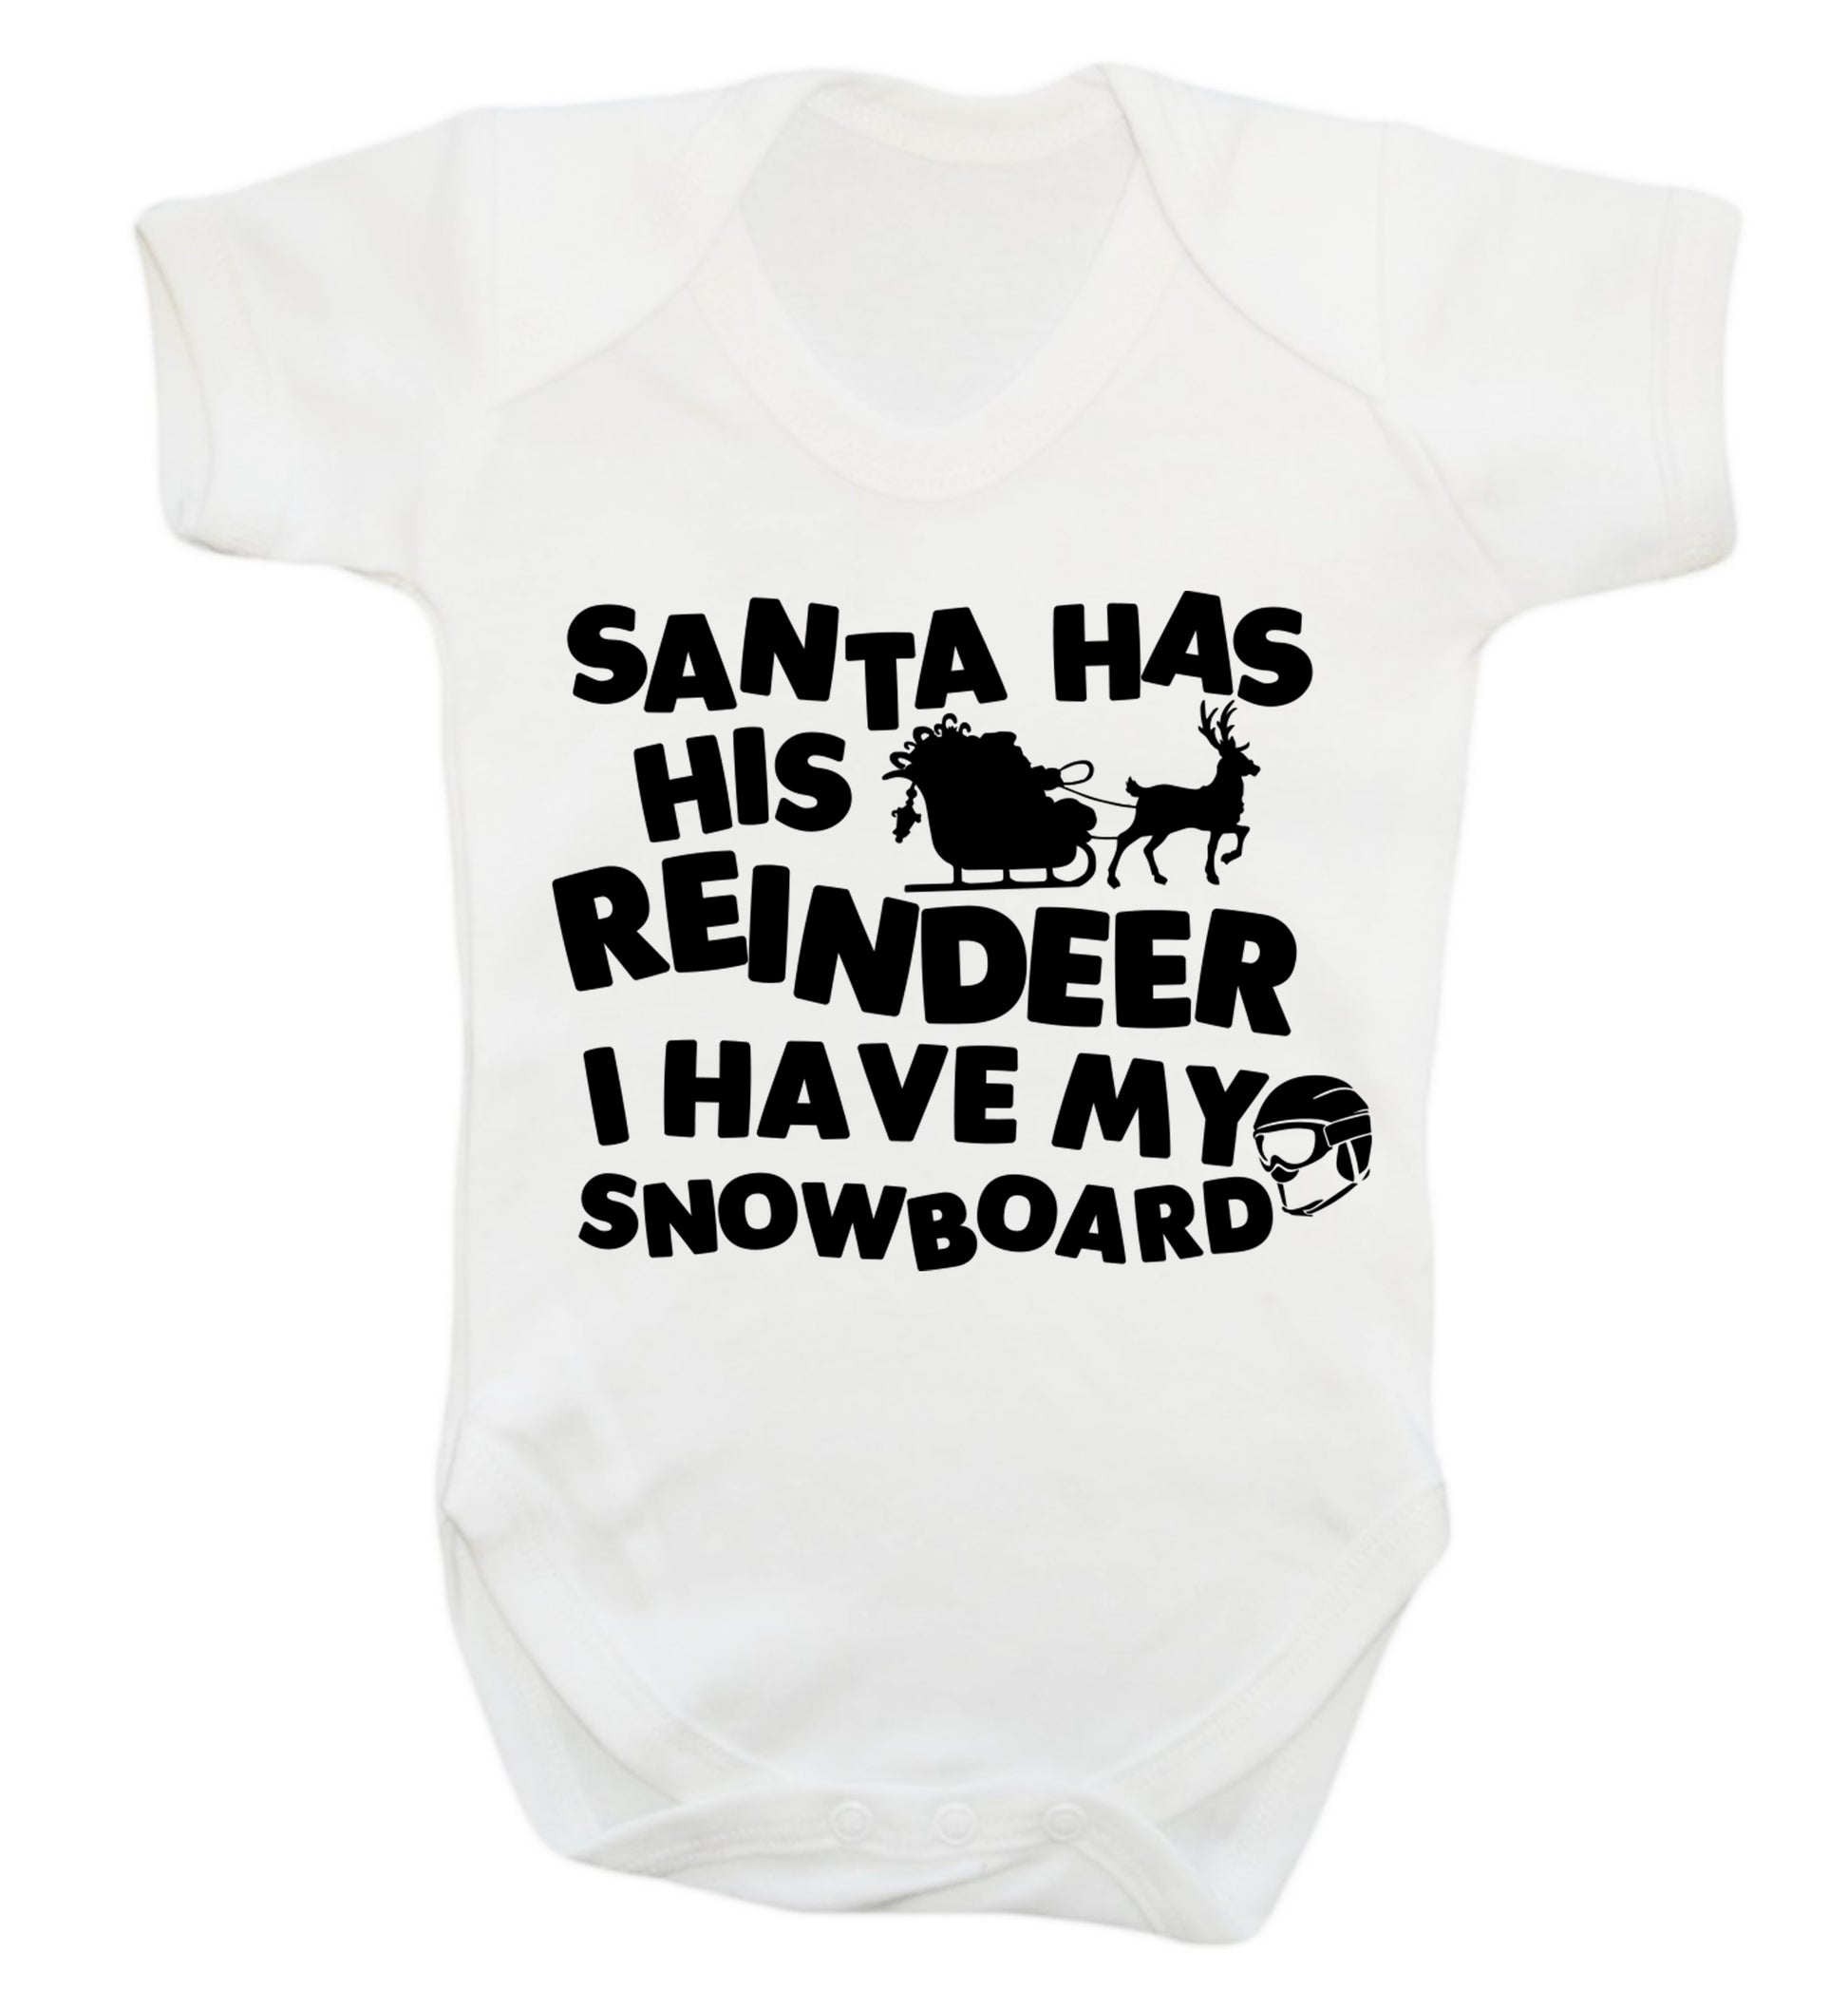 Santa has his reindeer I have my snowboard Baby Vest white 18-24 months